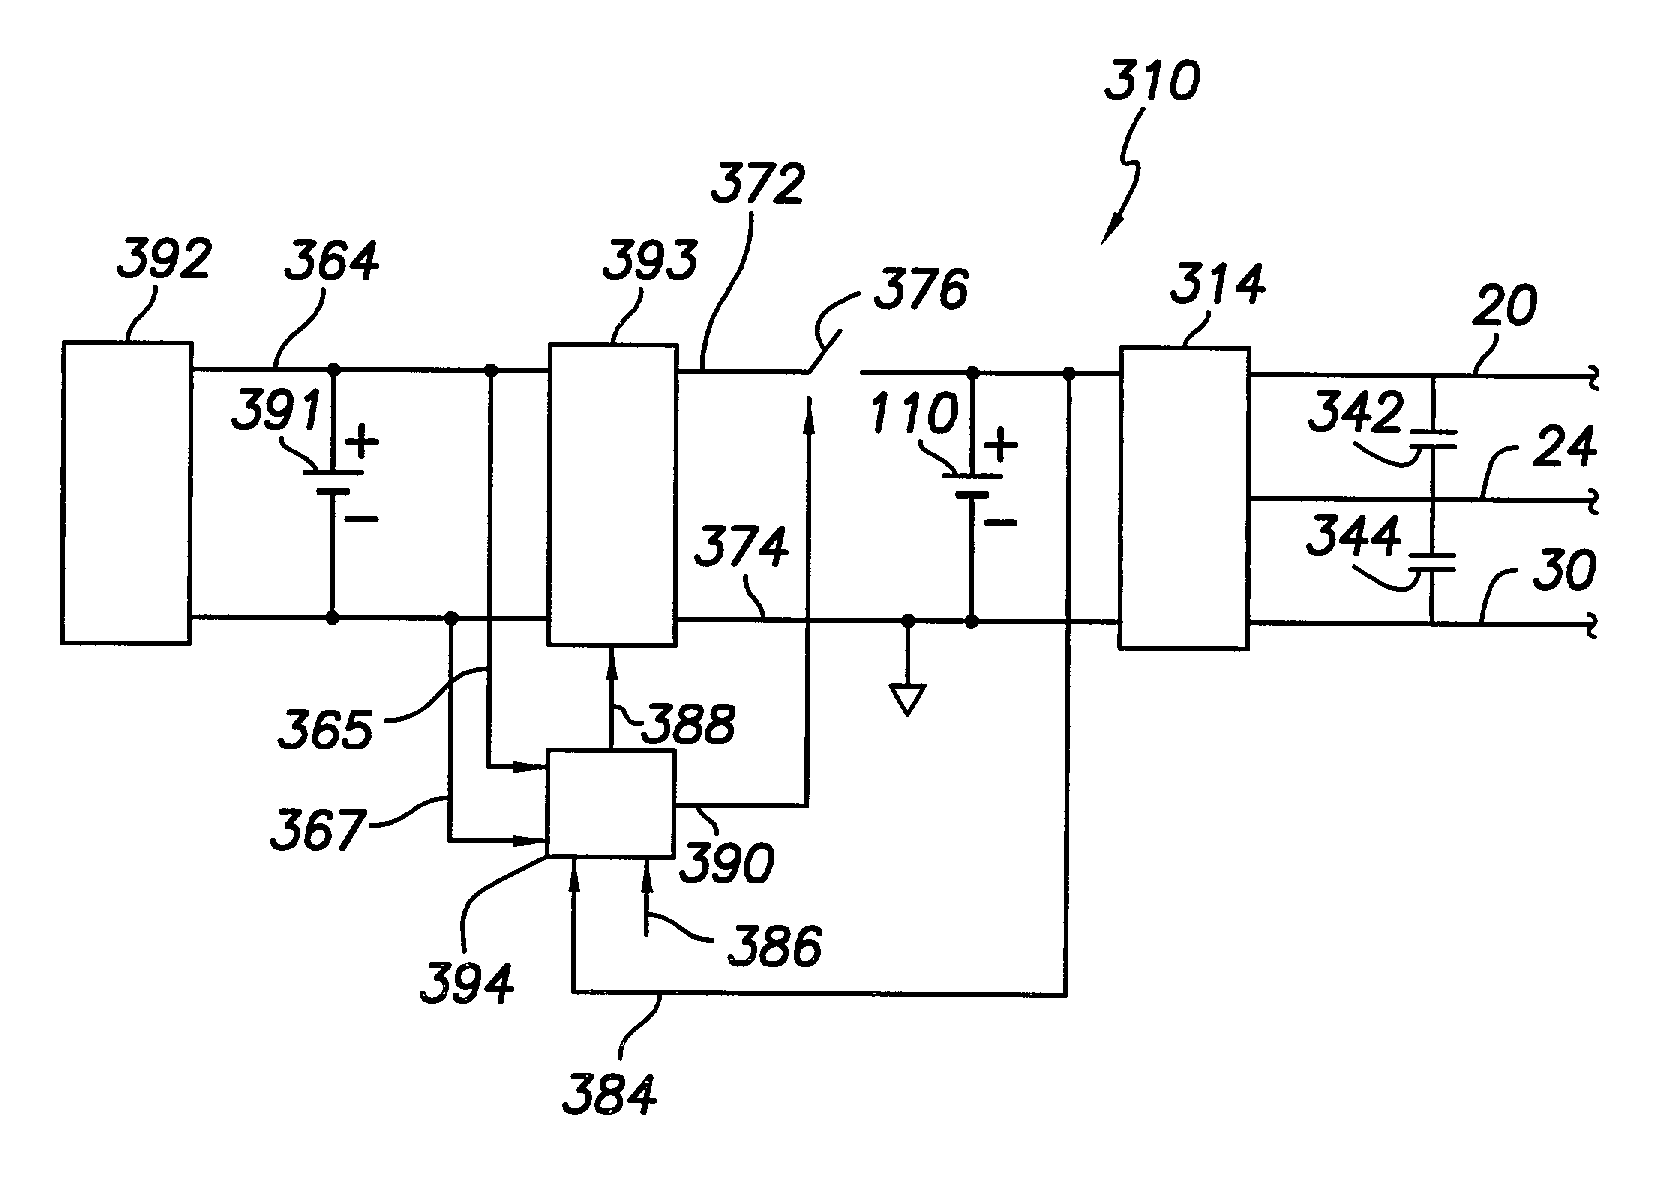 Method of recharging battery for an implantable medical device